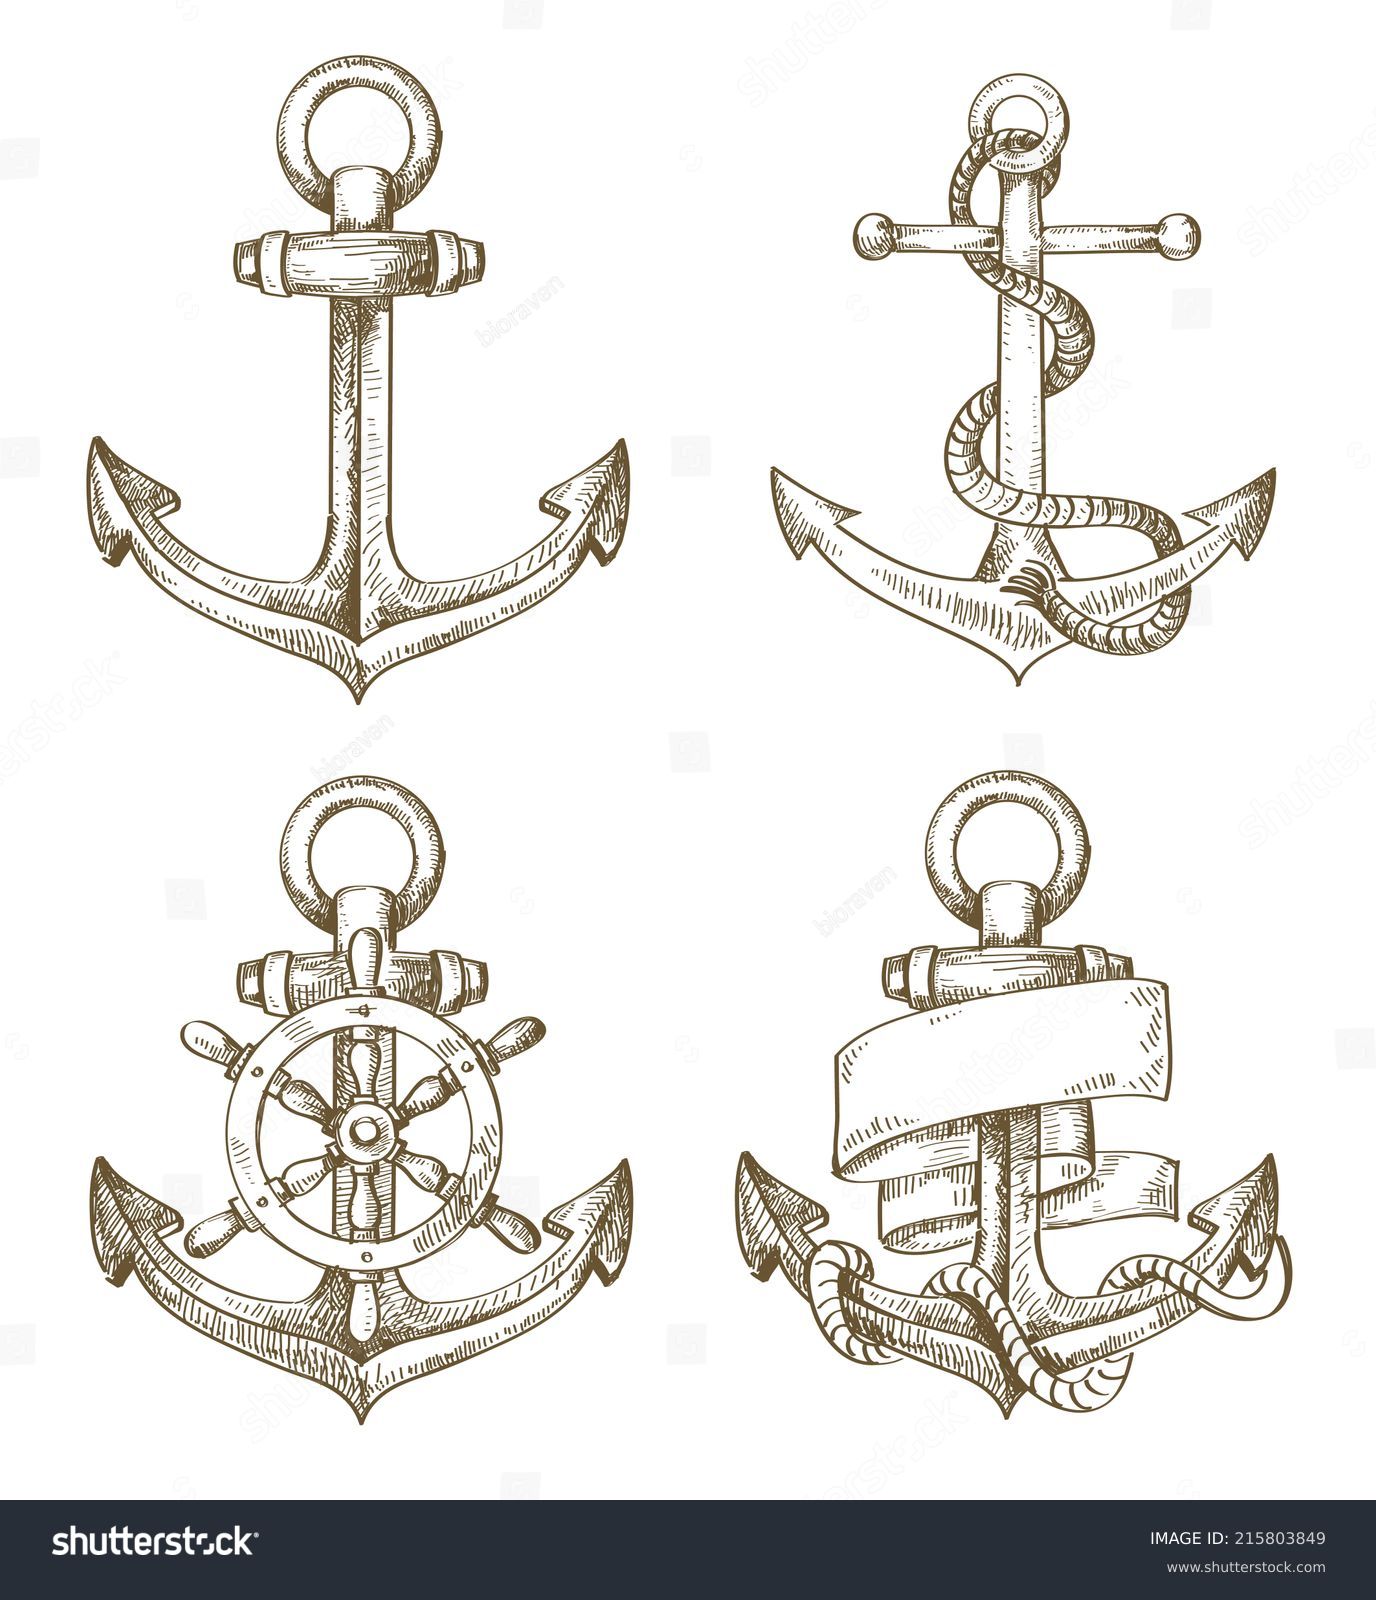 SVG of vector hand drawn anchor icon set on background svg